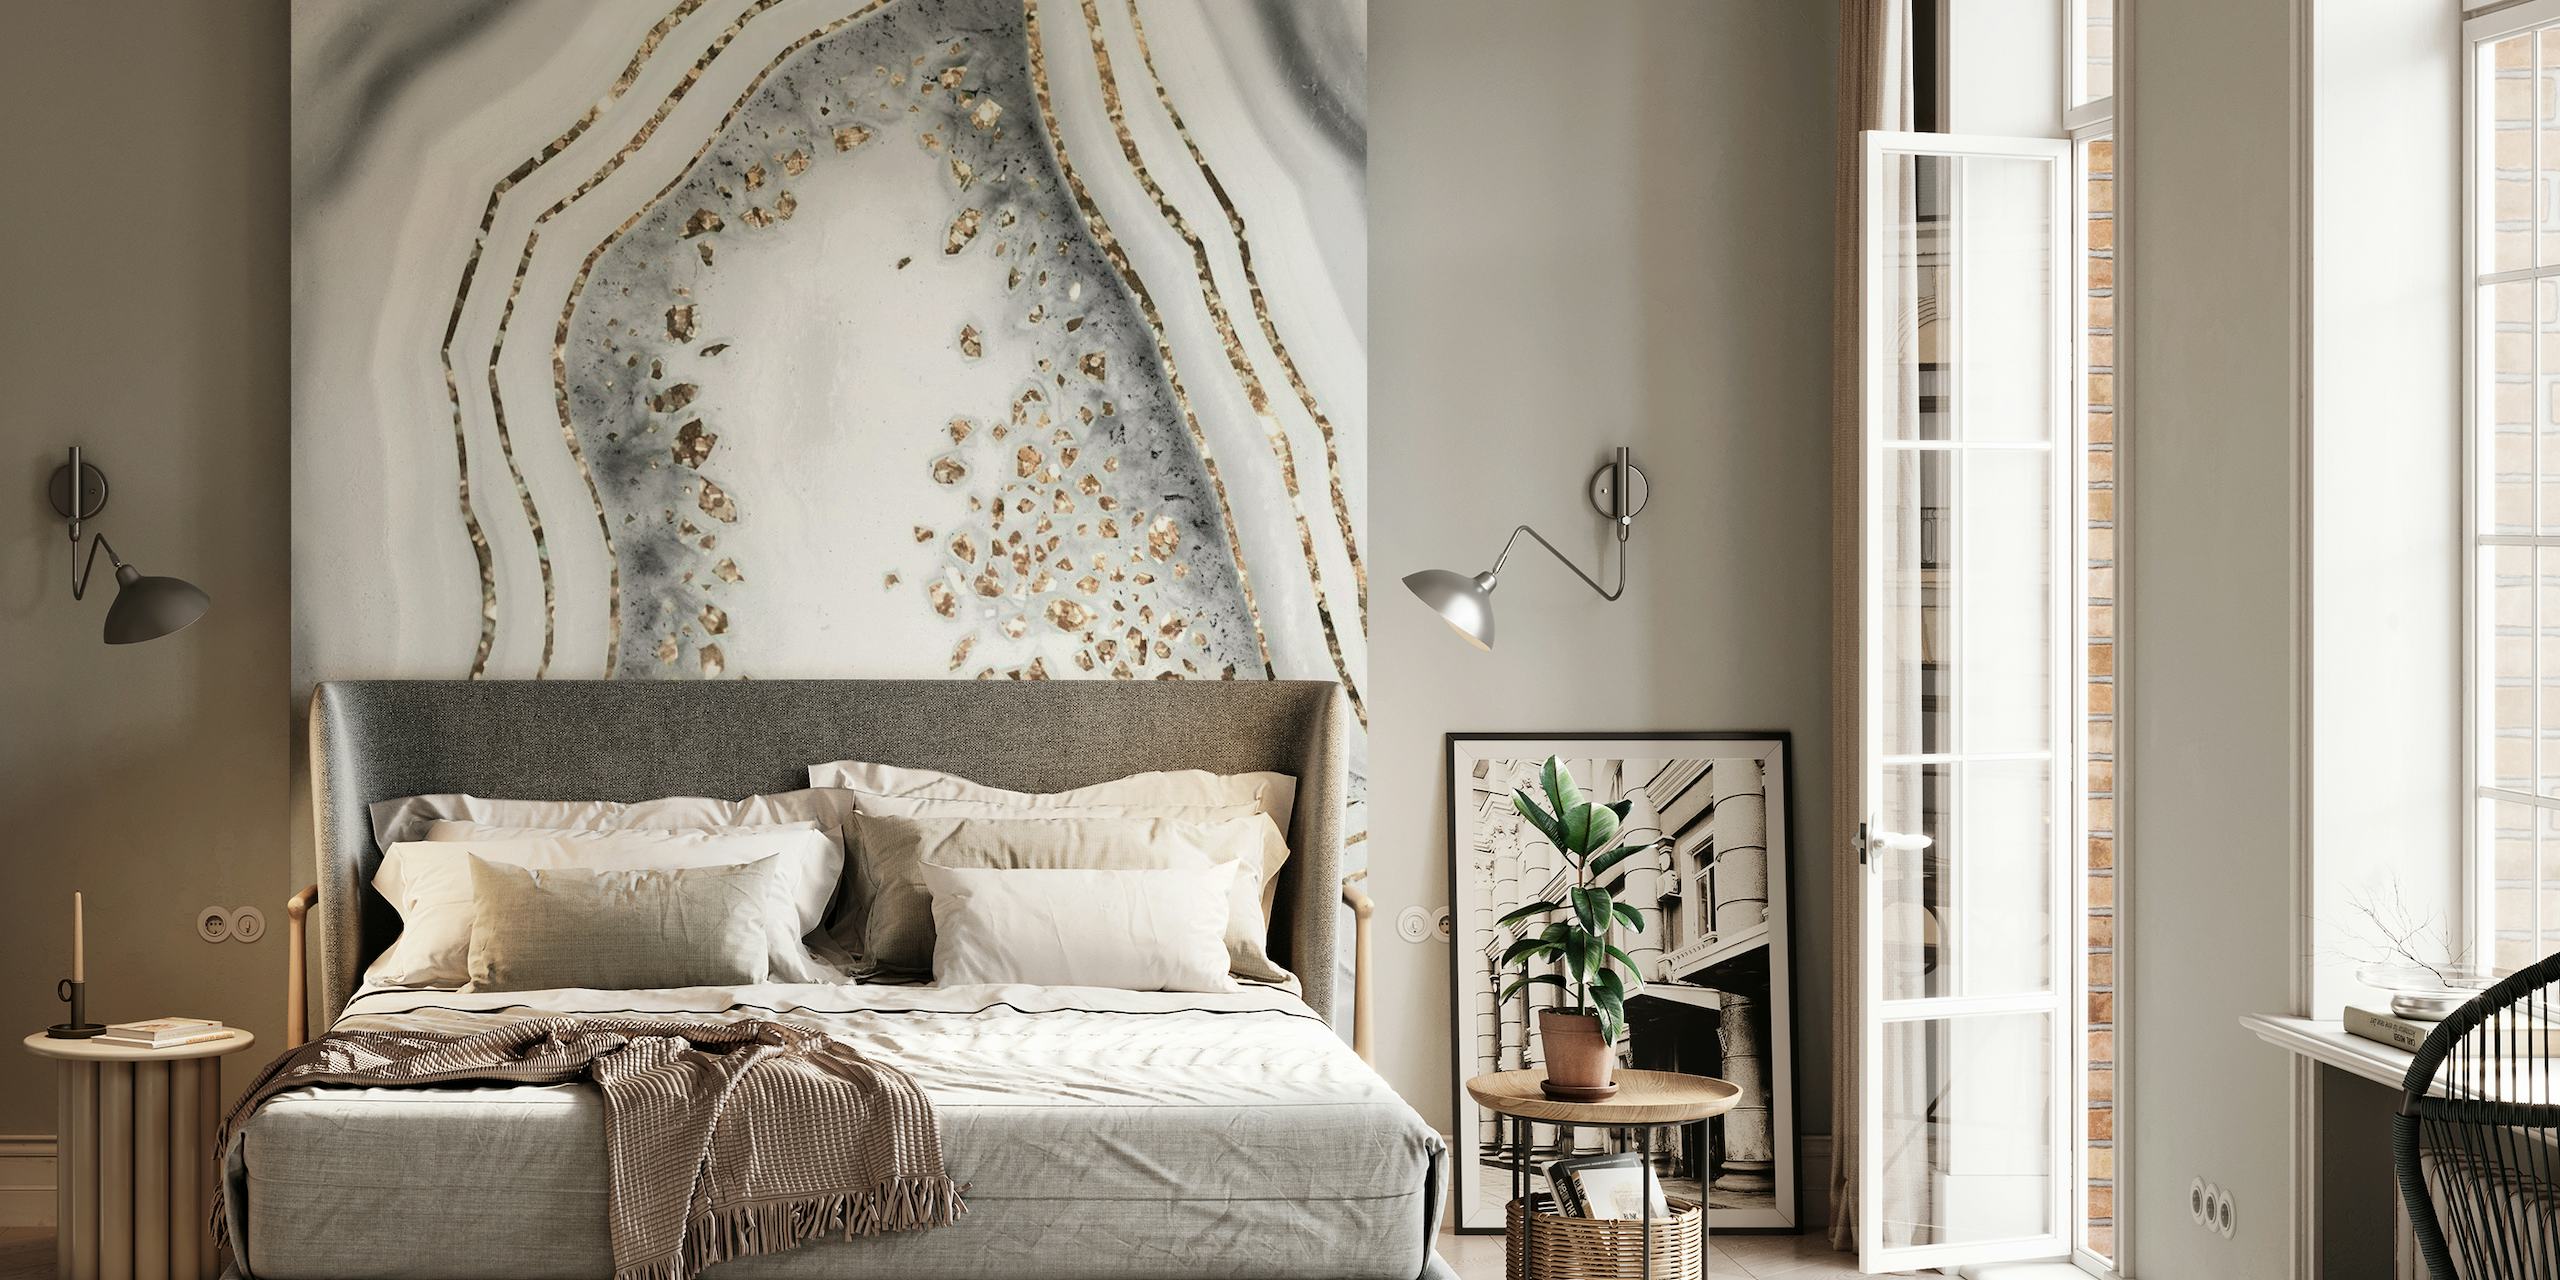 Elegant agate-inspired wall mural with gold glitter detailing